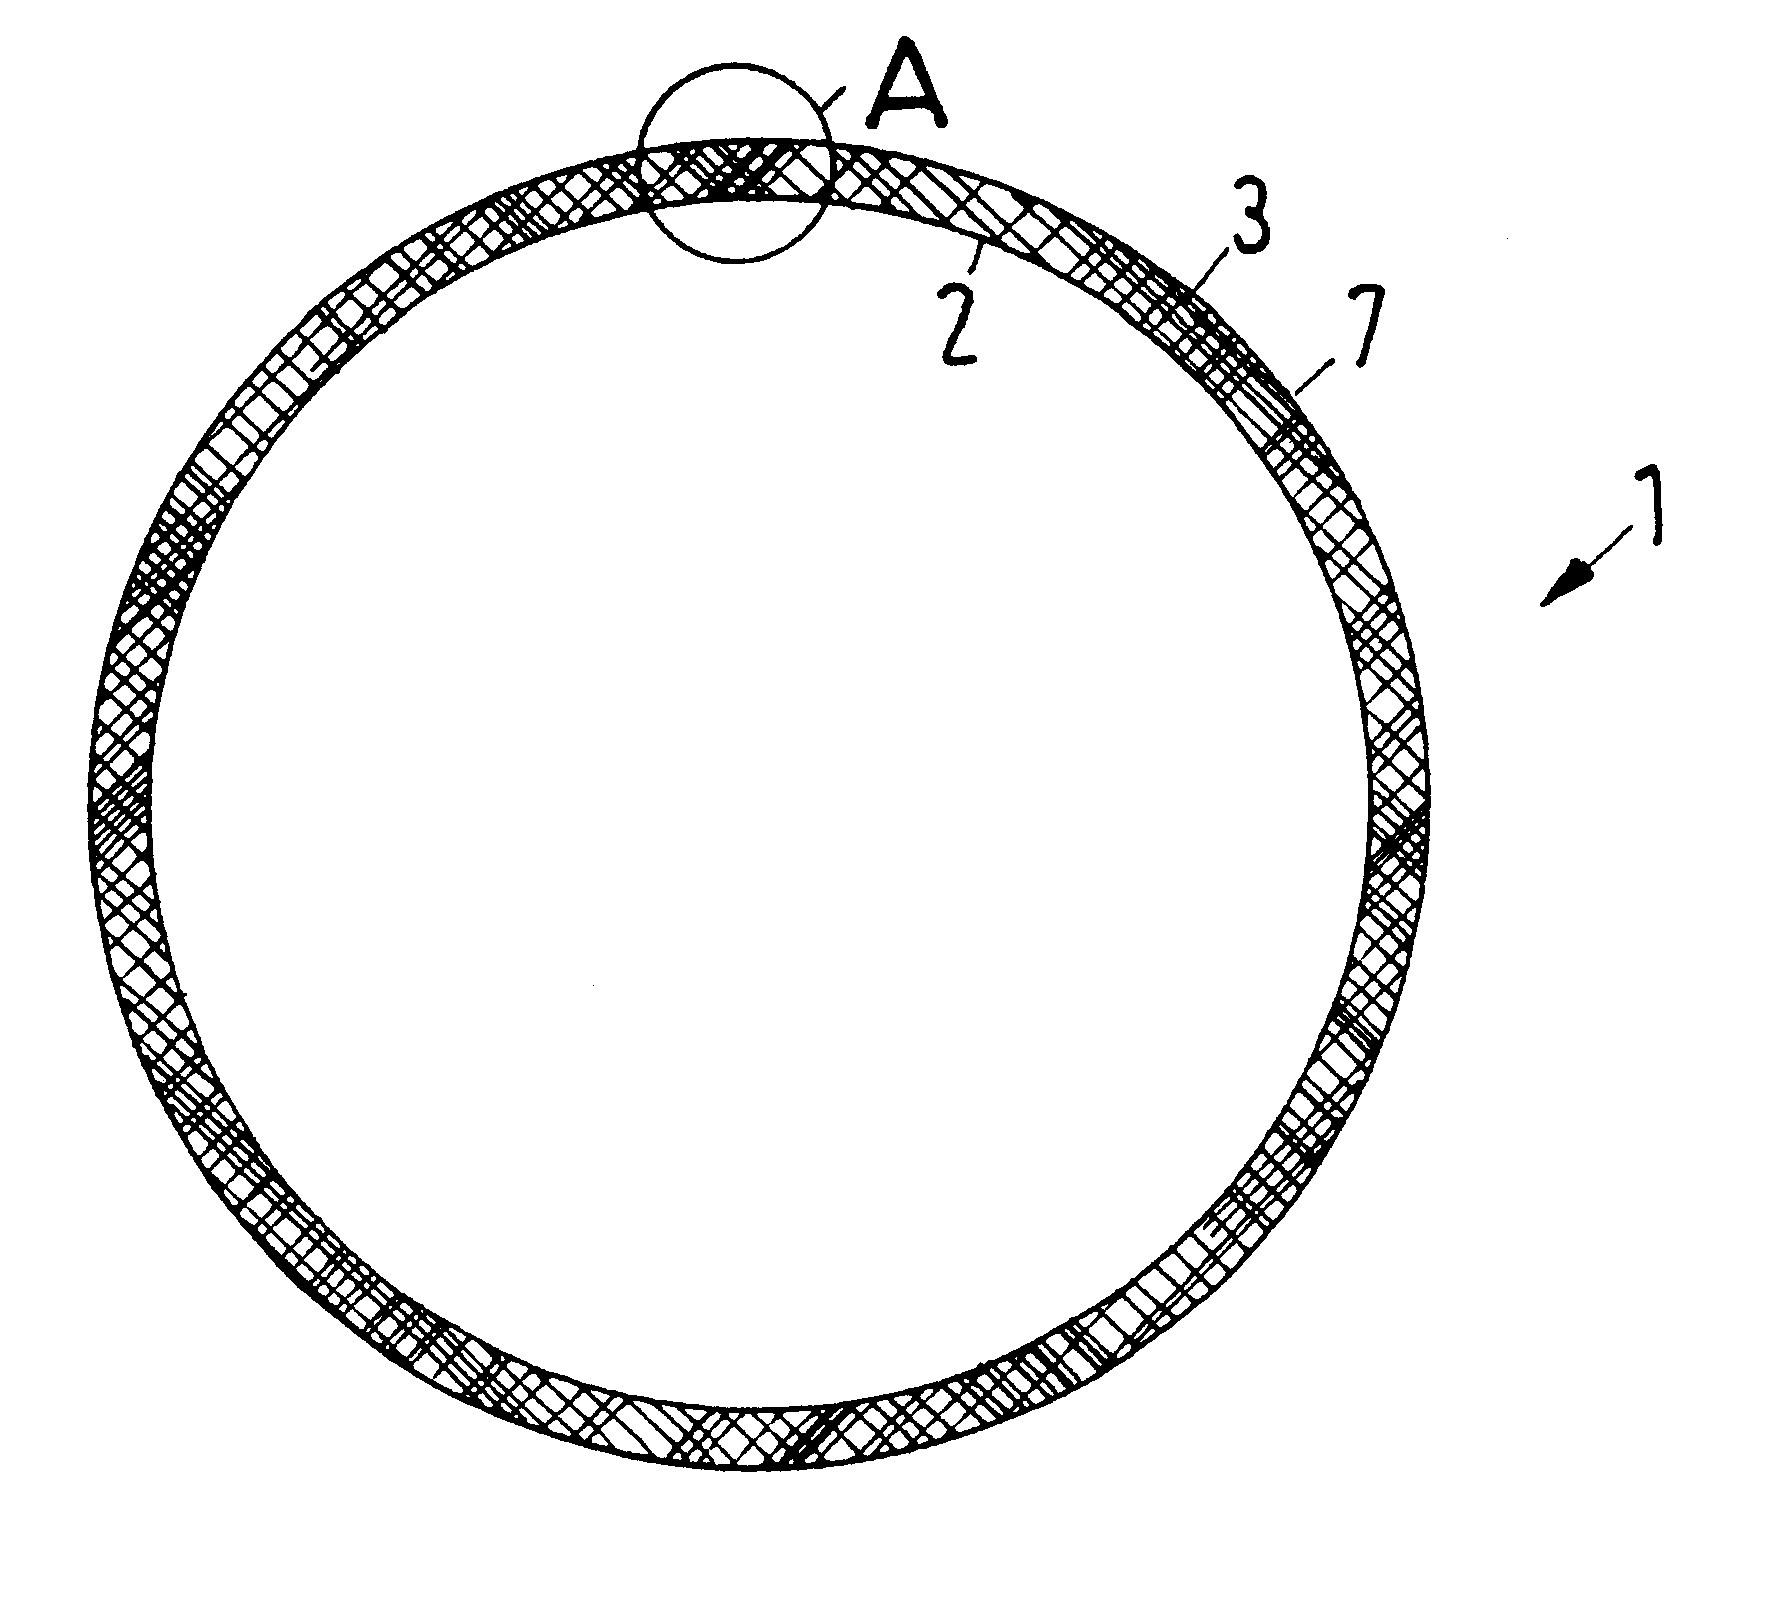 Process for glazing a material web and roller for a glazing calender